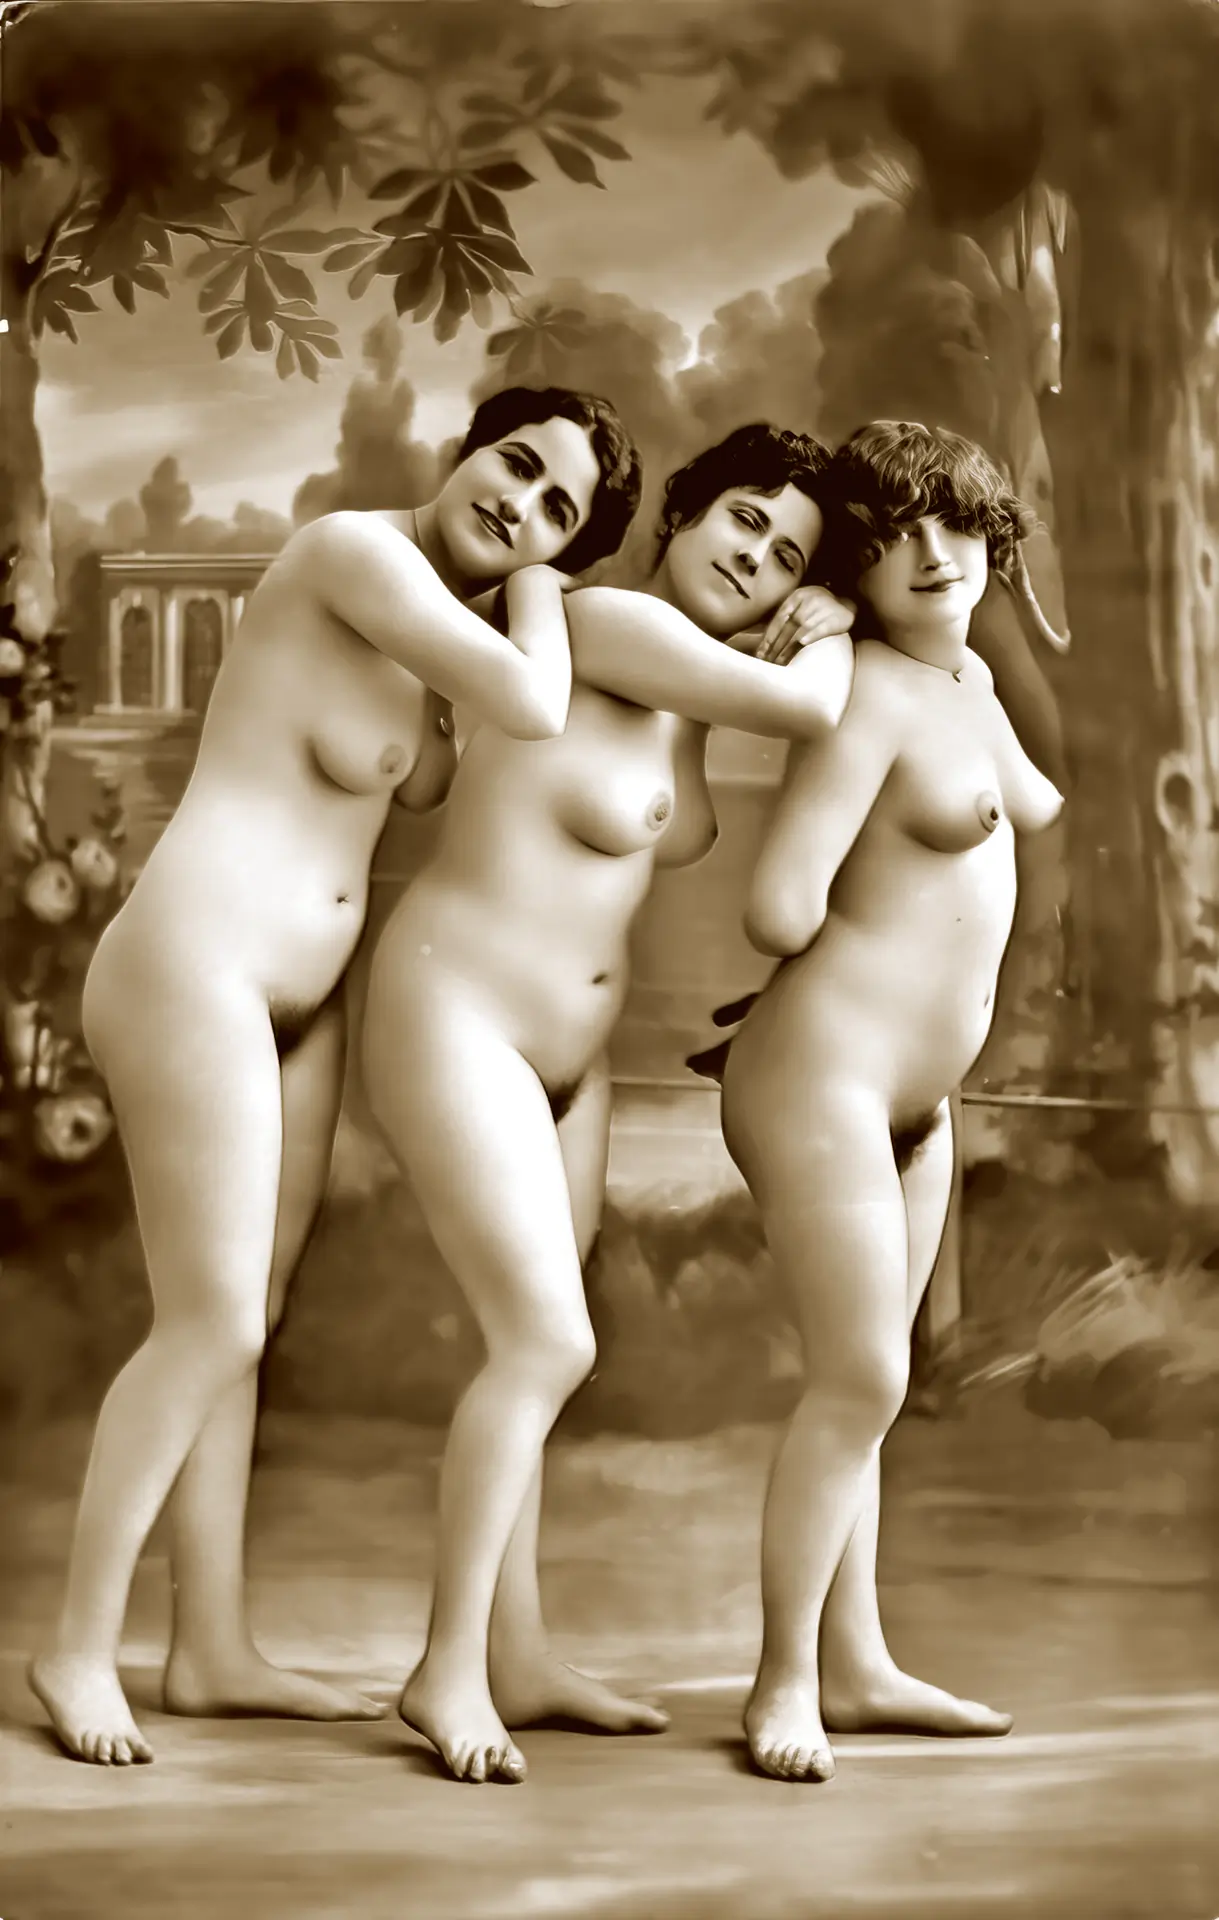 Three chubby antique beauties with small boobs lean on each other